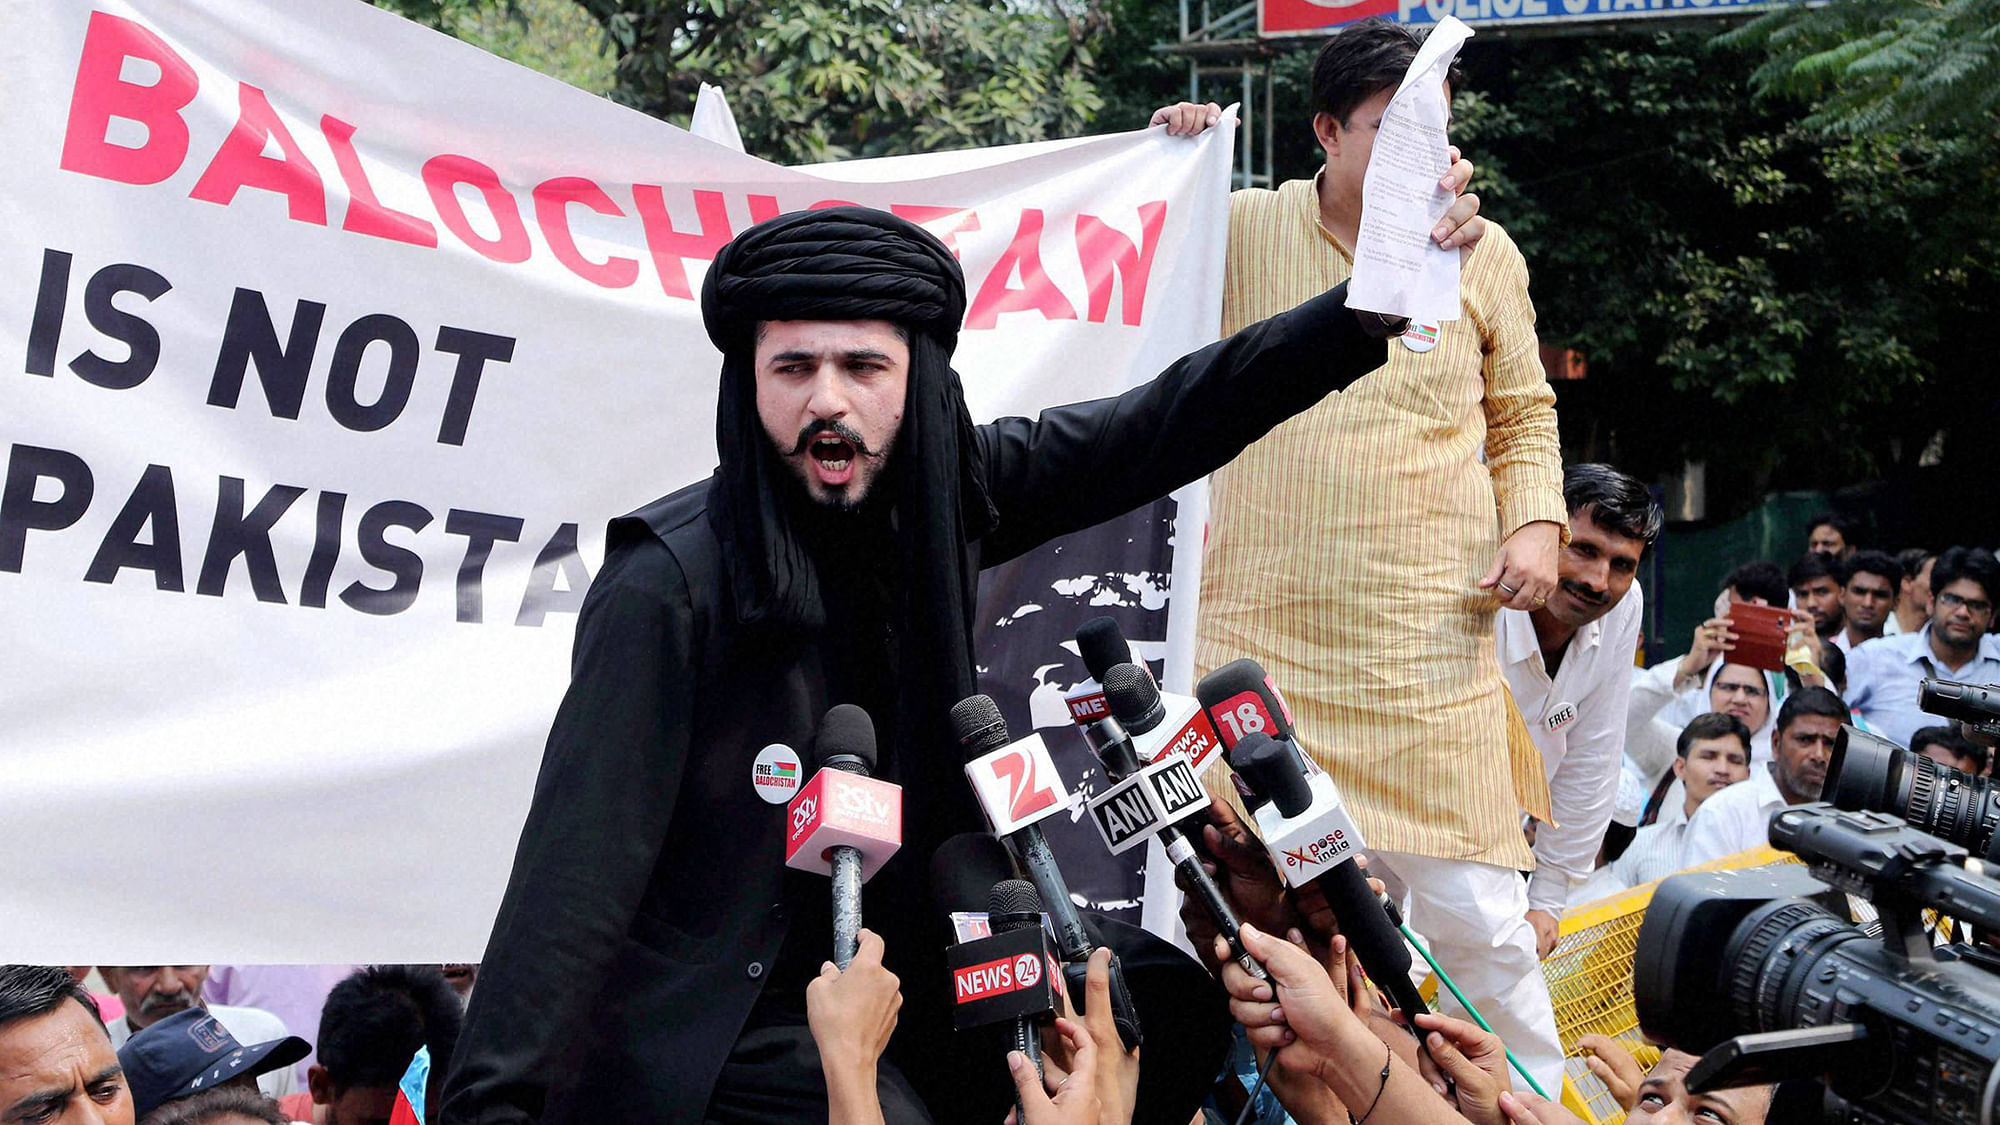 Baloch leaders protest against Pakistan (Photo: PTI)